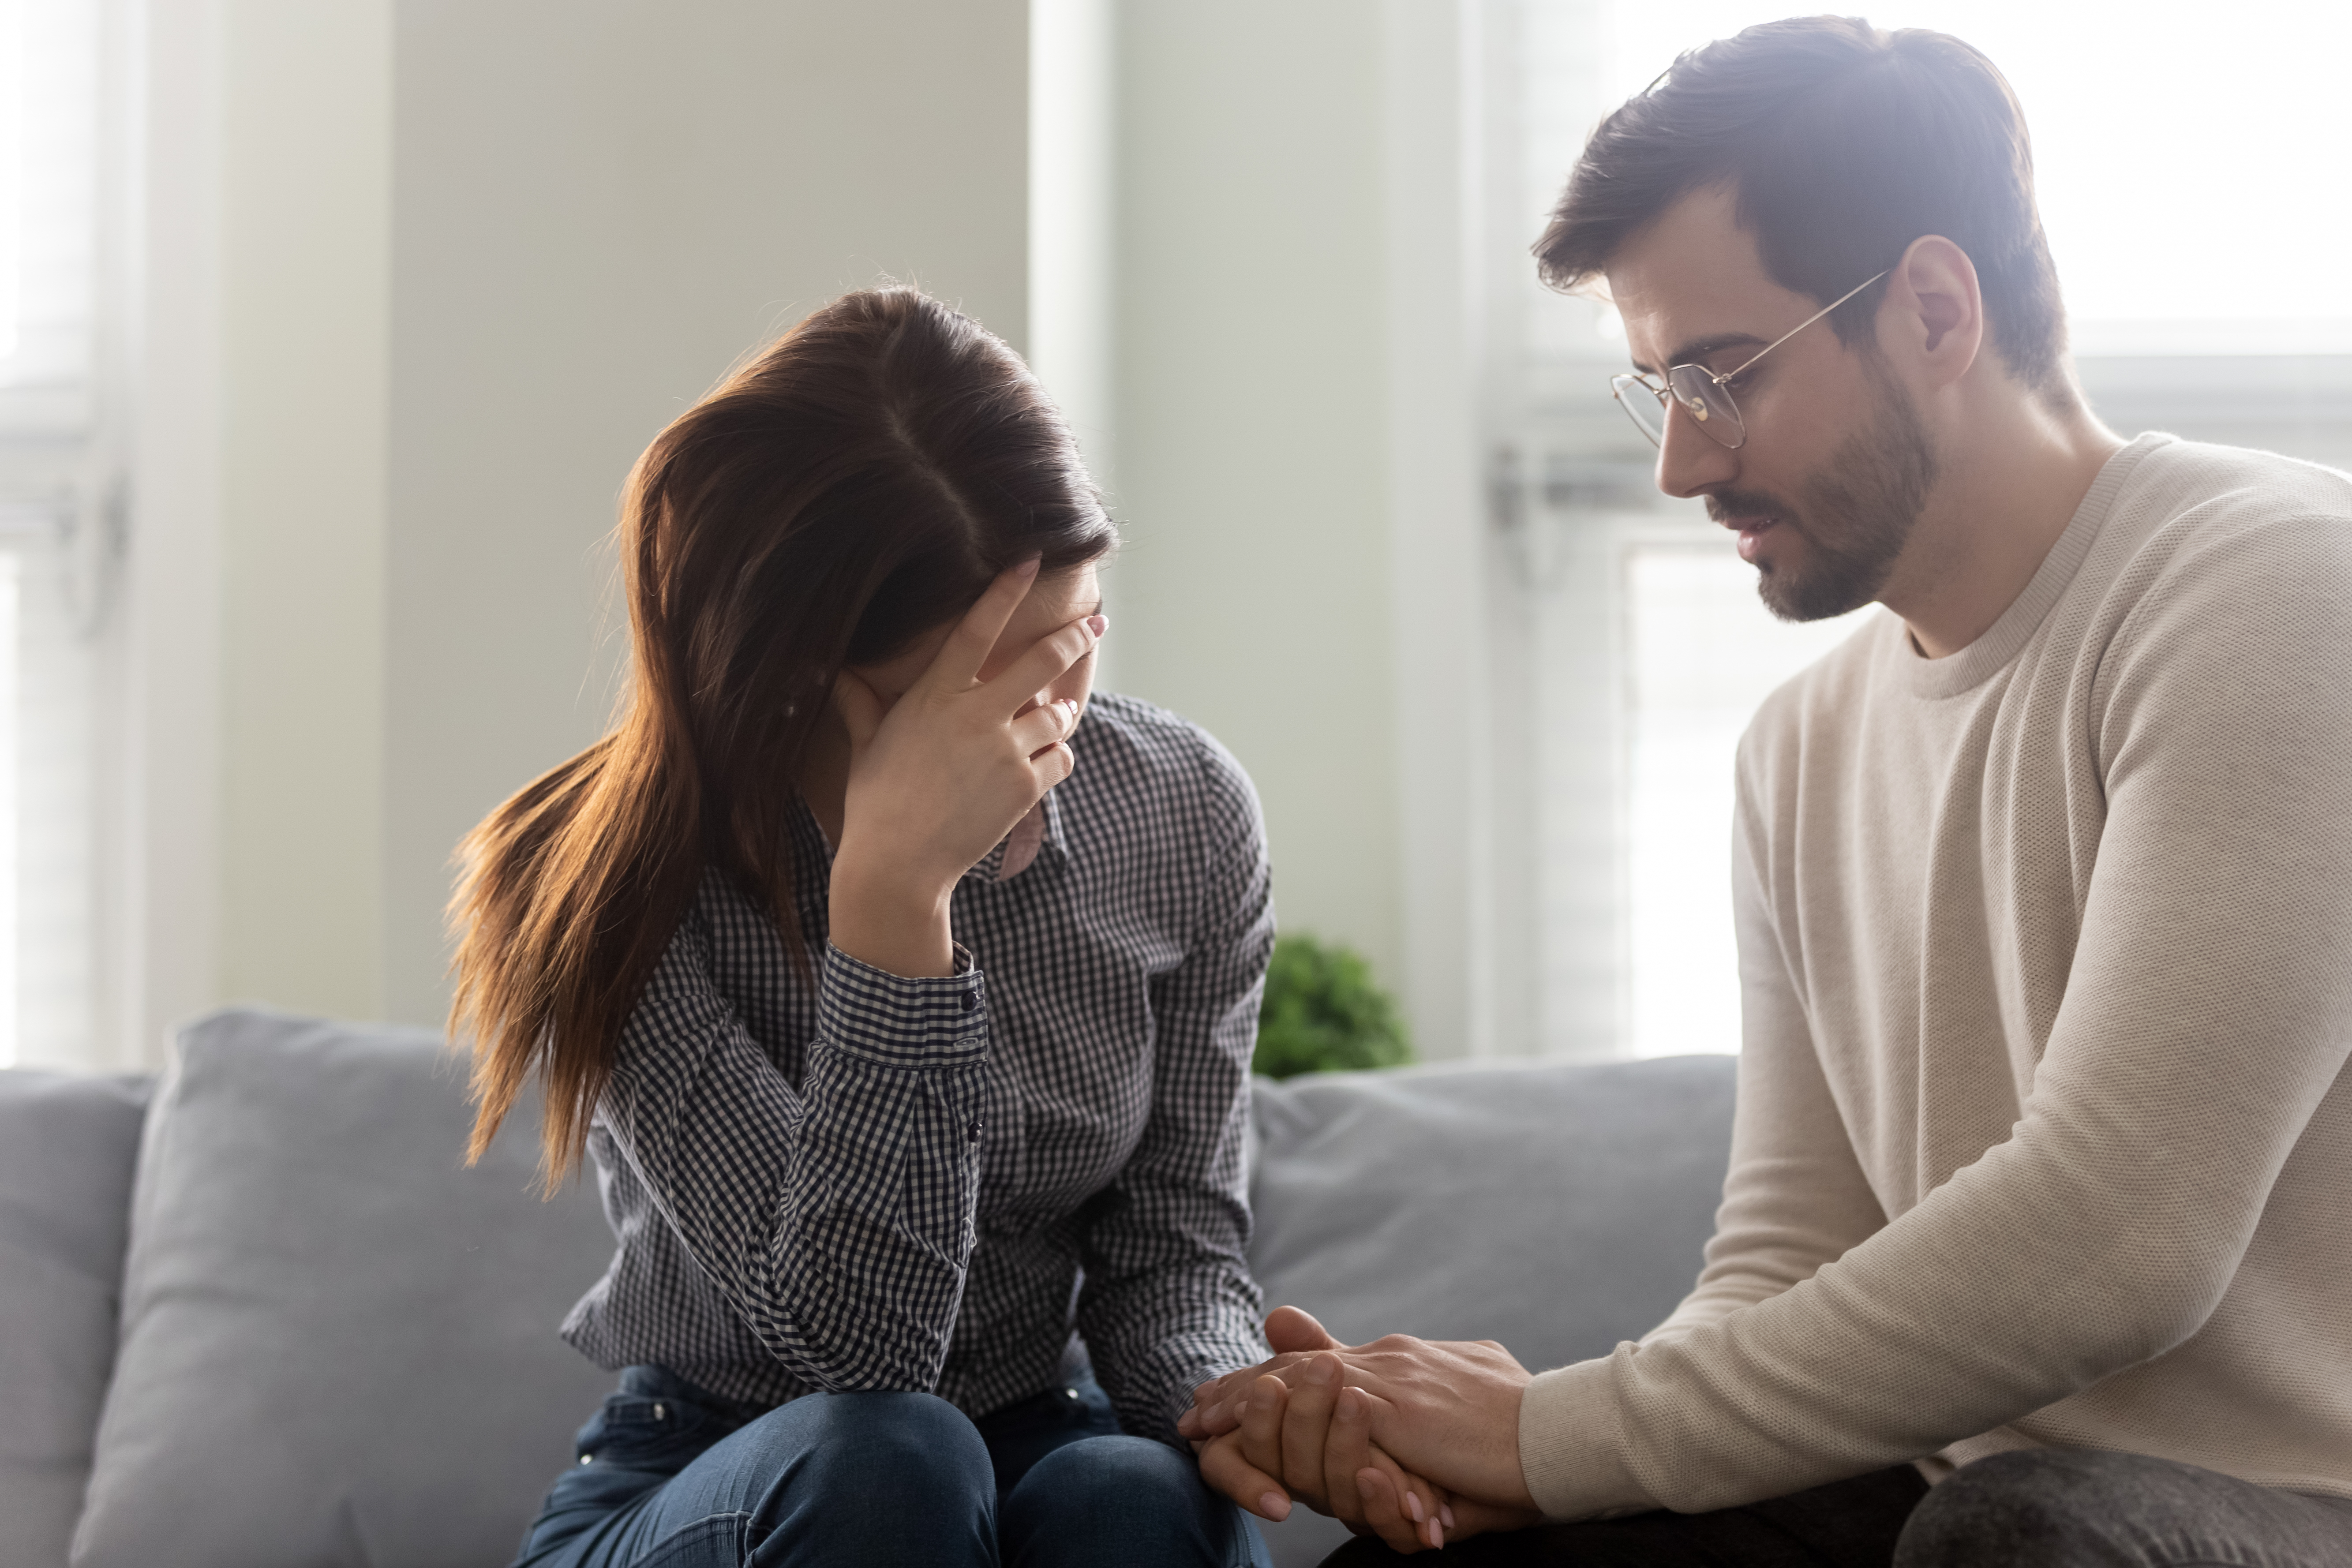 Husband comforting his depressed wife | Source: Shutterstock